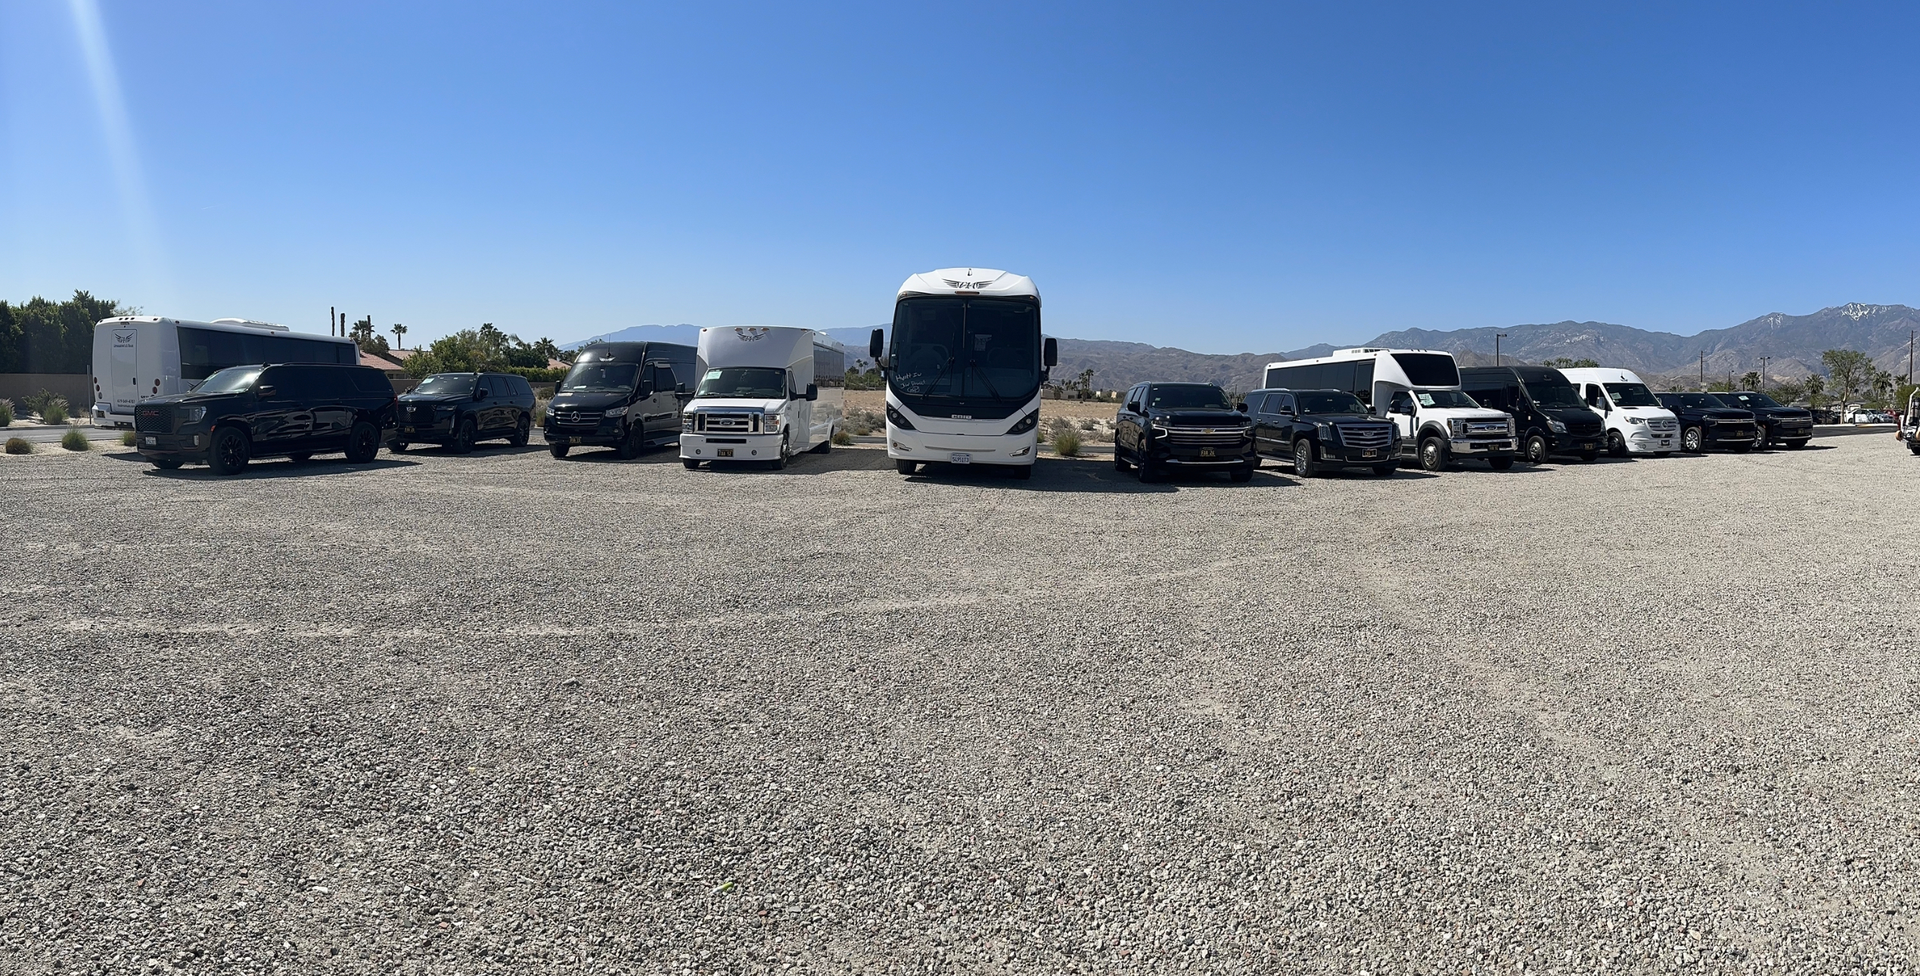 FAA transportation offers a wide variety of vehicles pictured parked in a gravel lot .